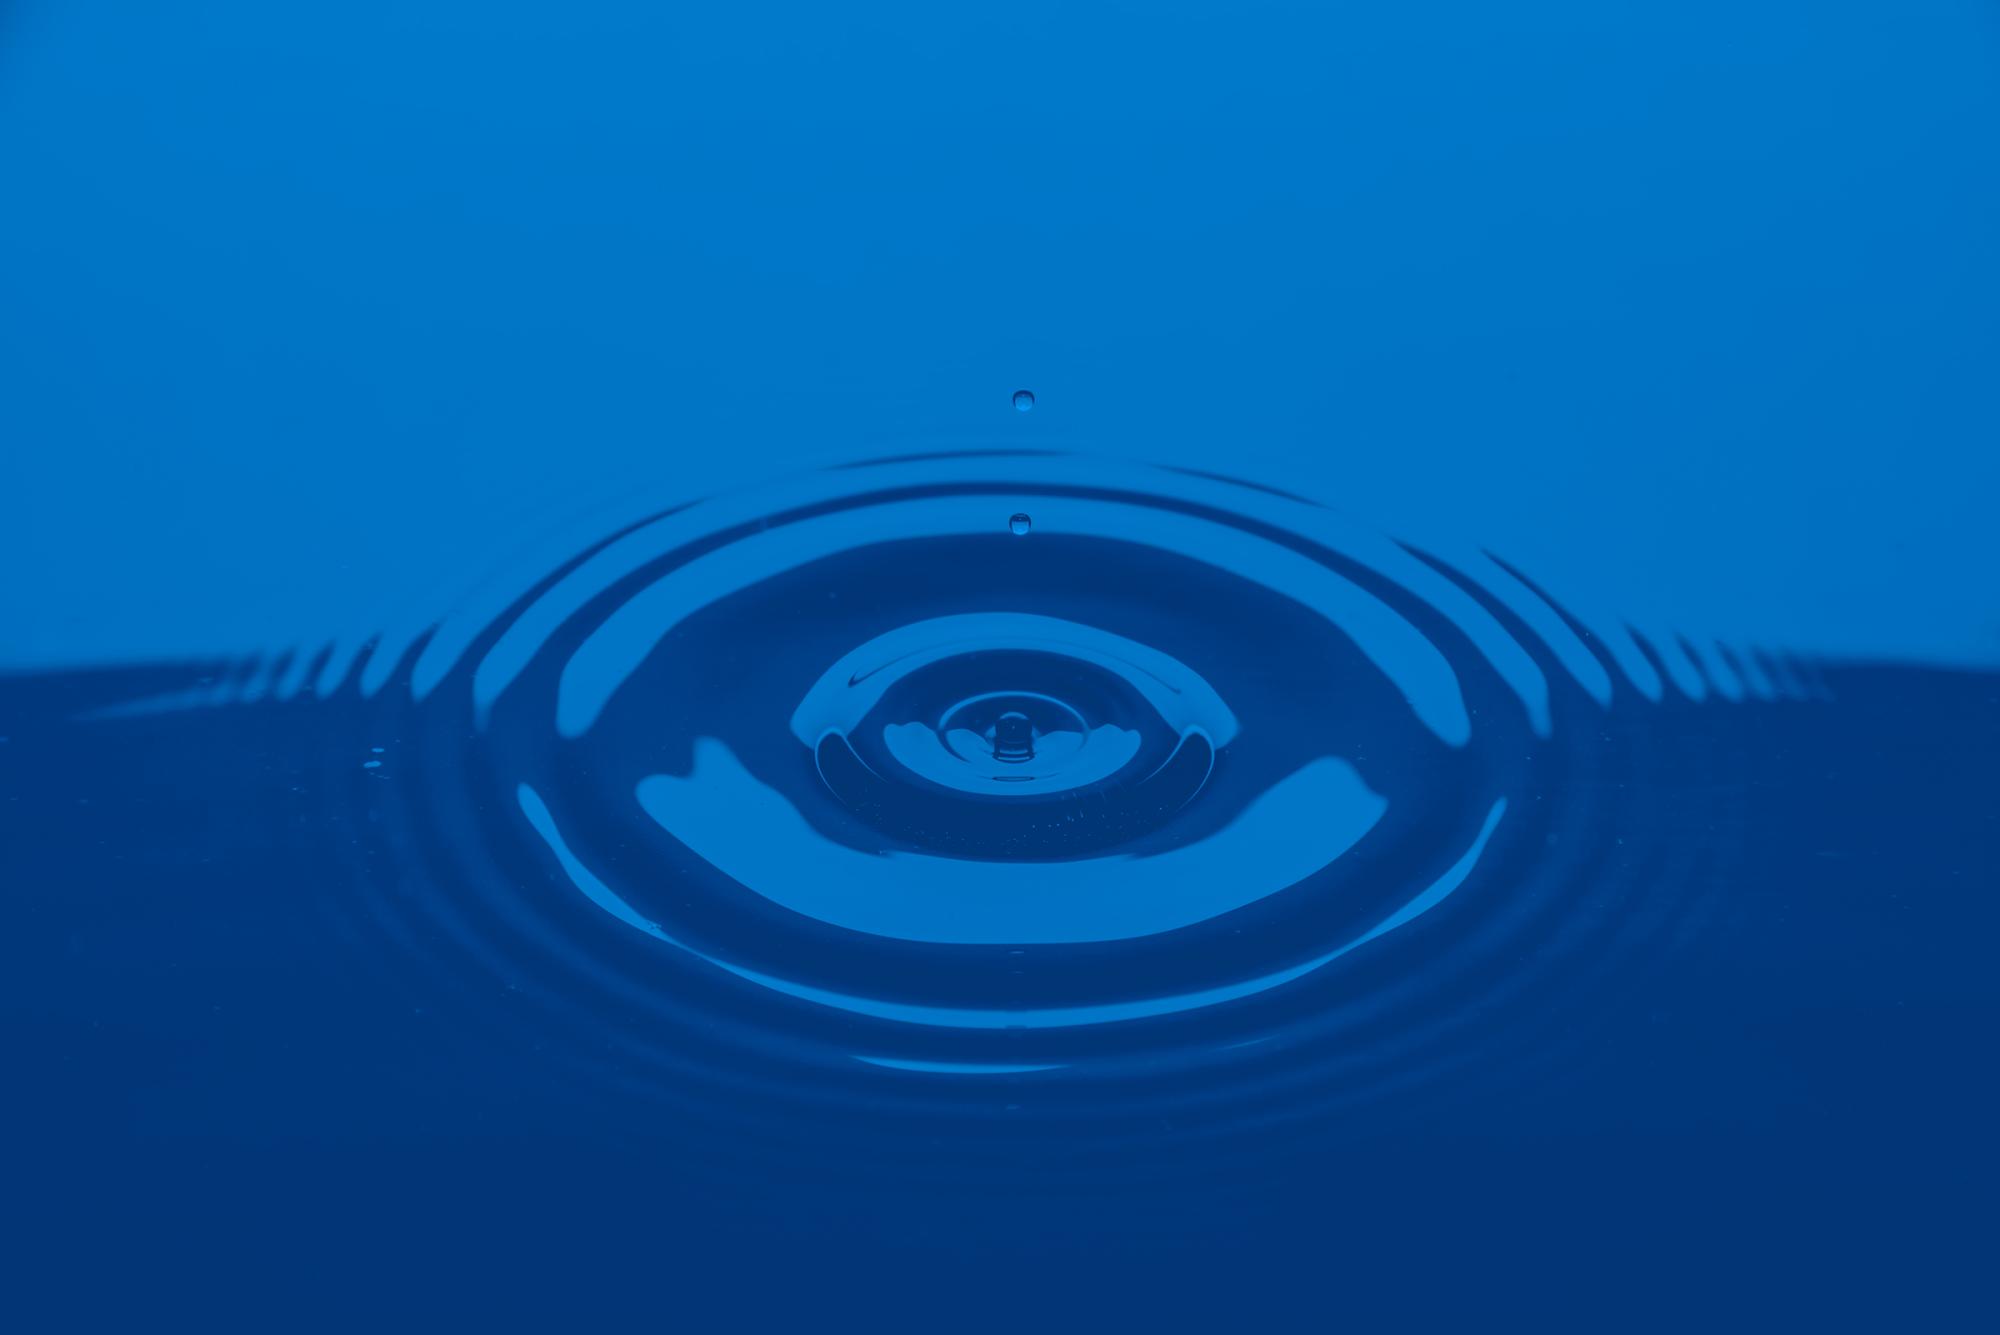 A drop falls onto a smooth water surface causing concentric rings  to move outward